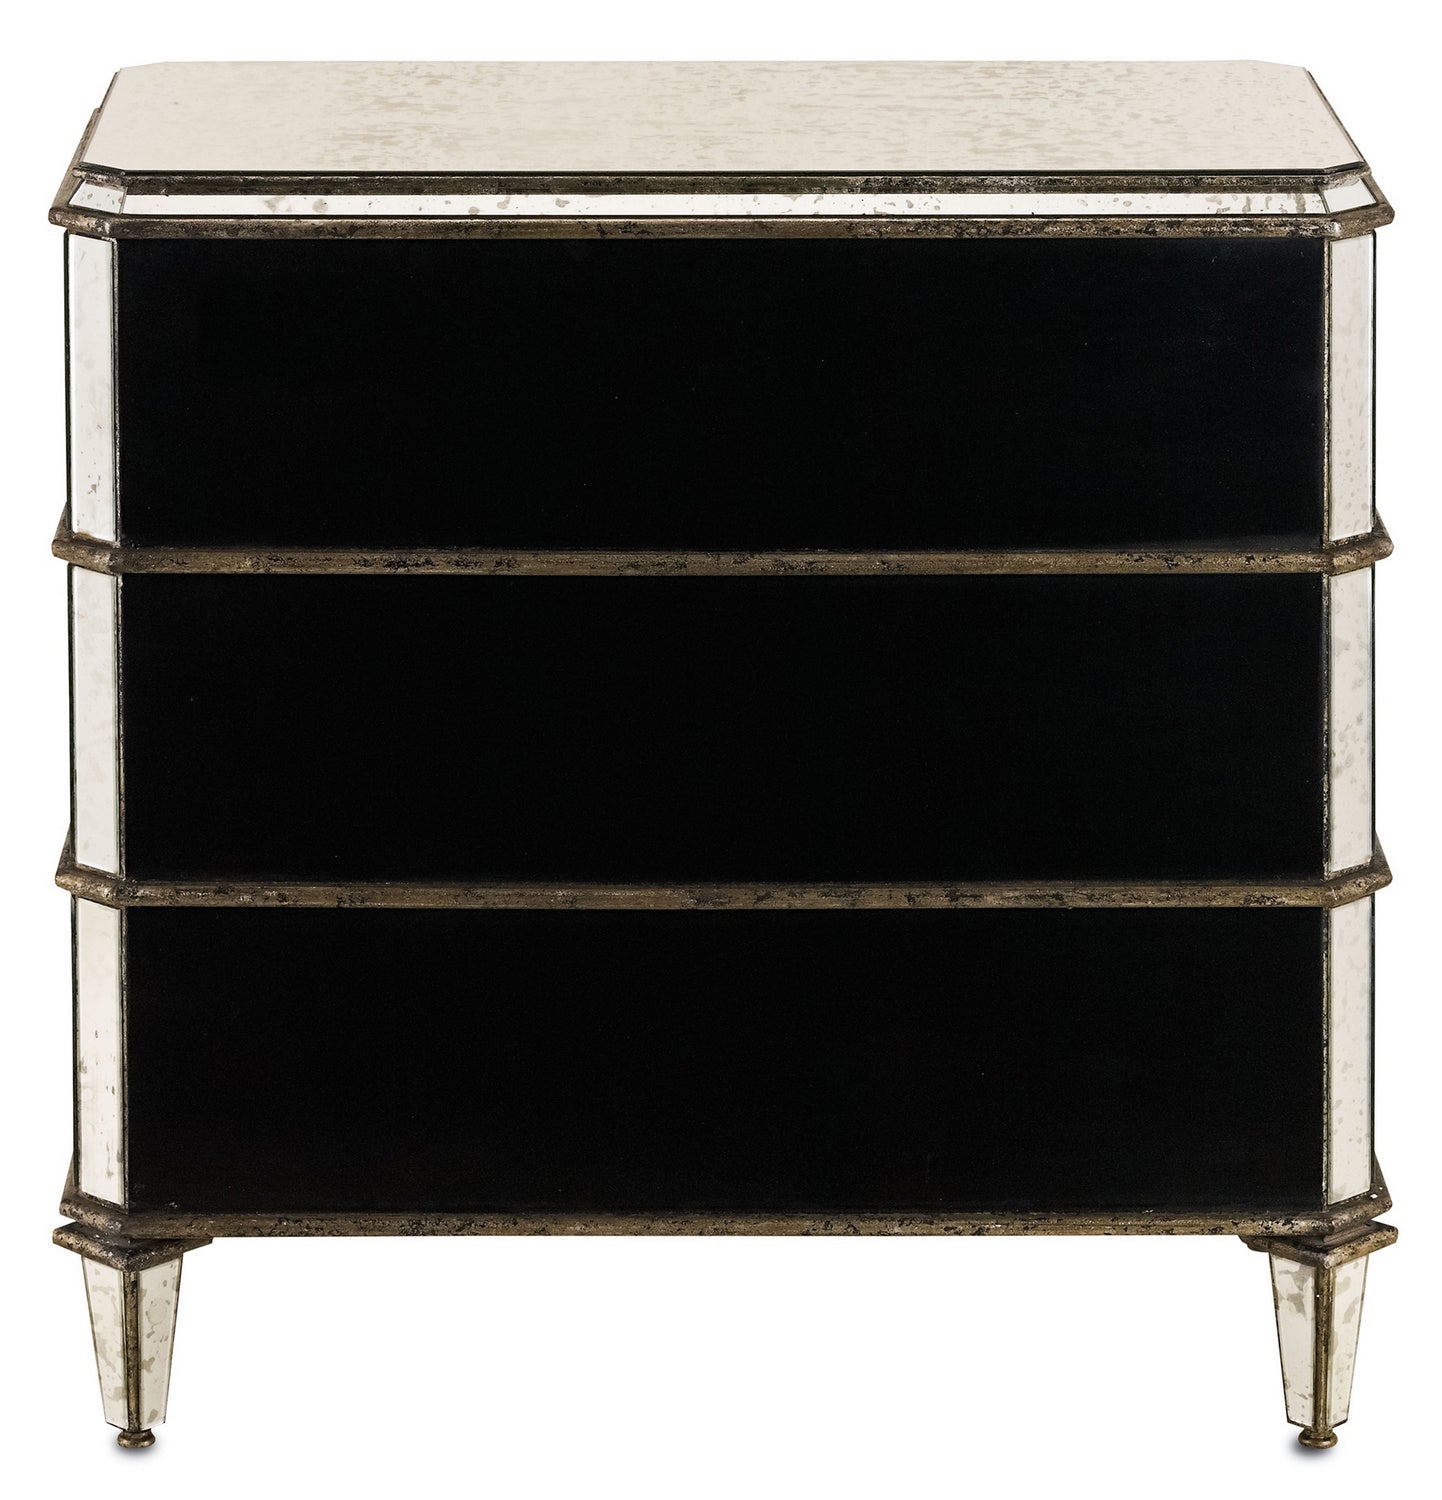 Chest from the Antiqued collection in Antique Mirror finish